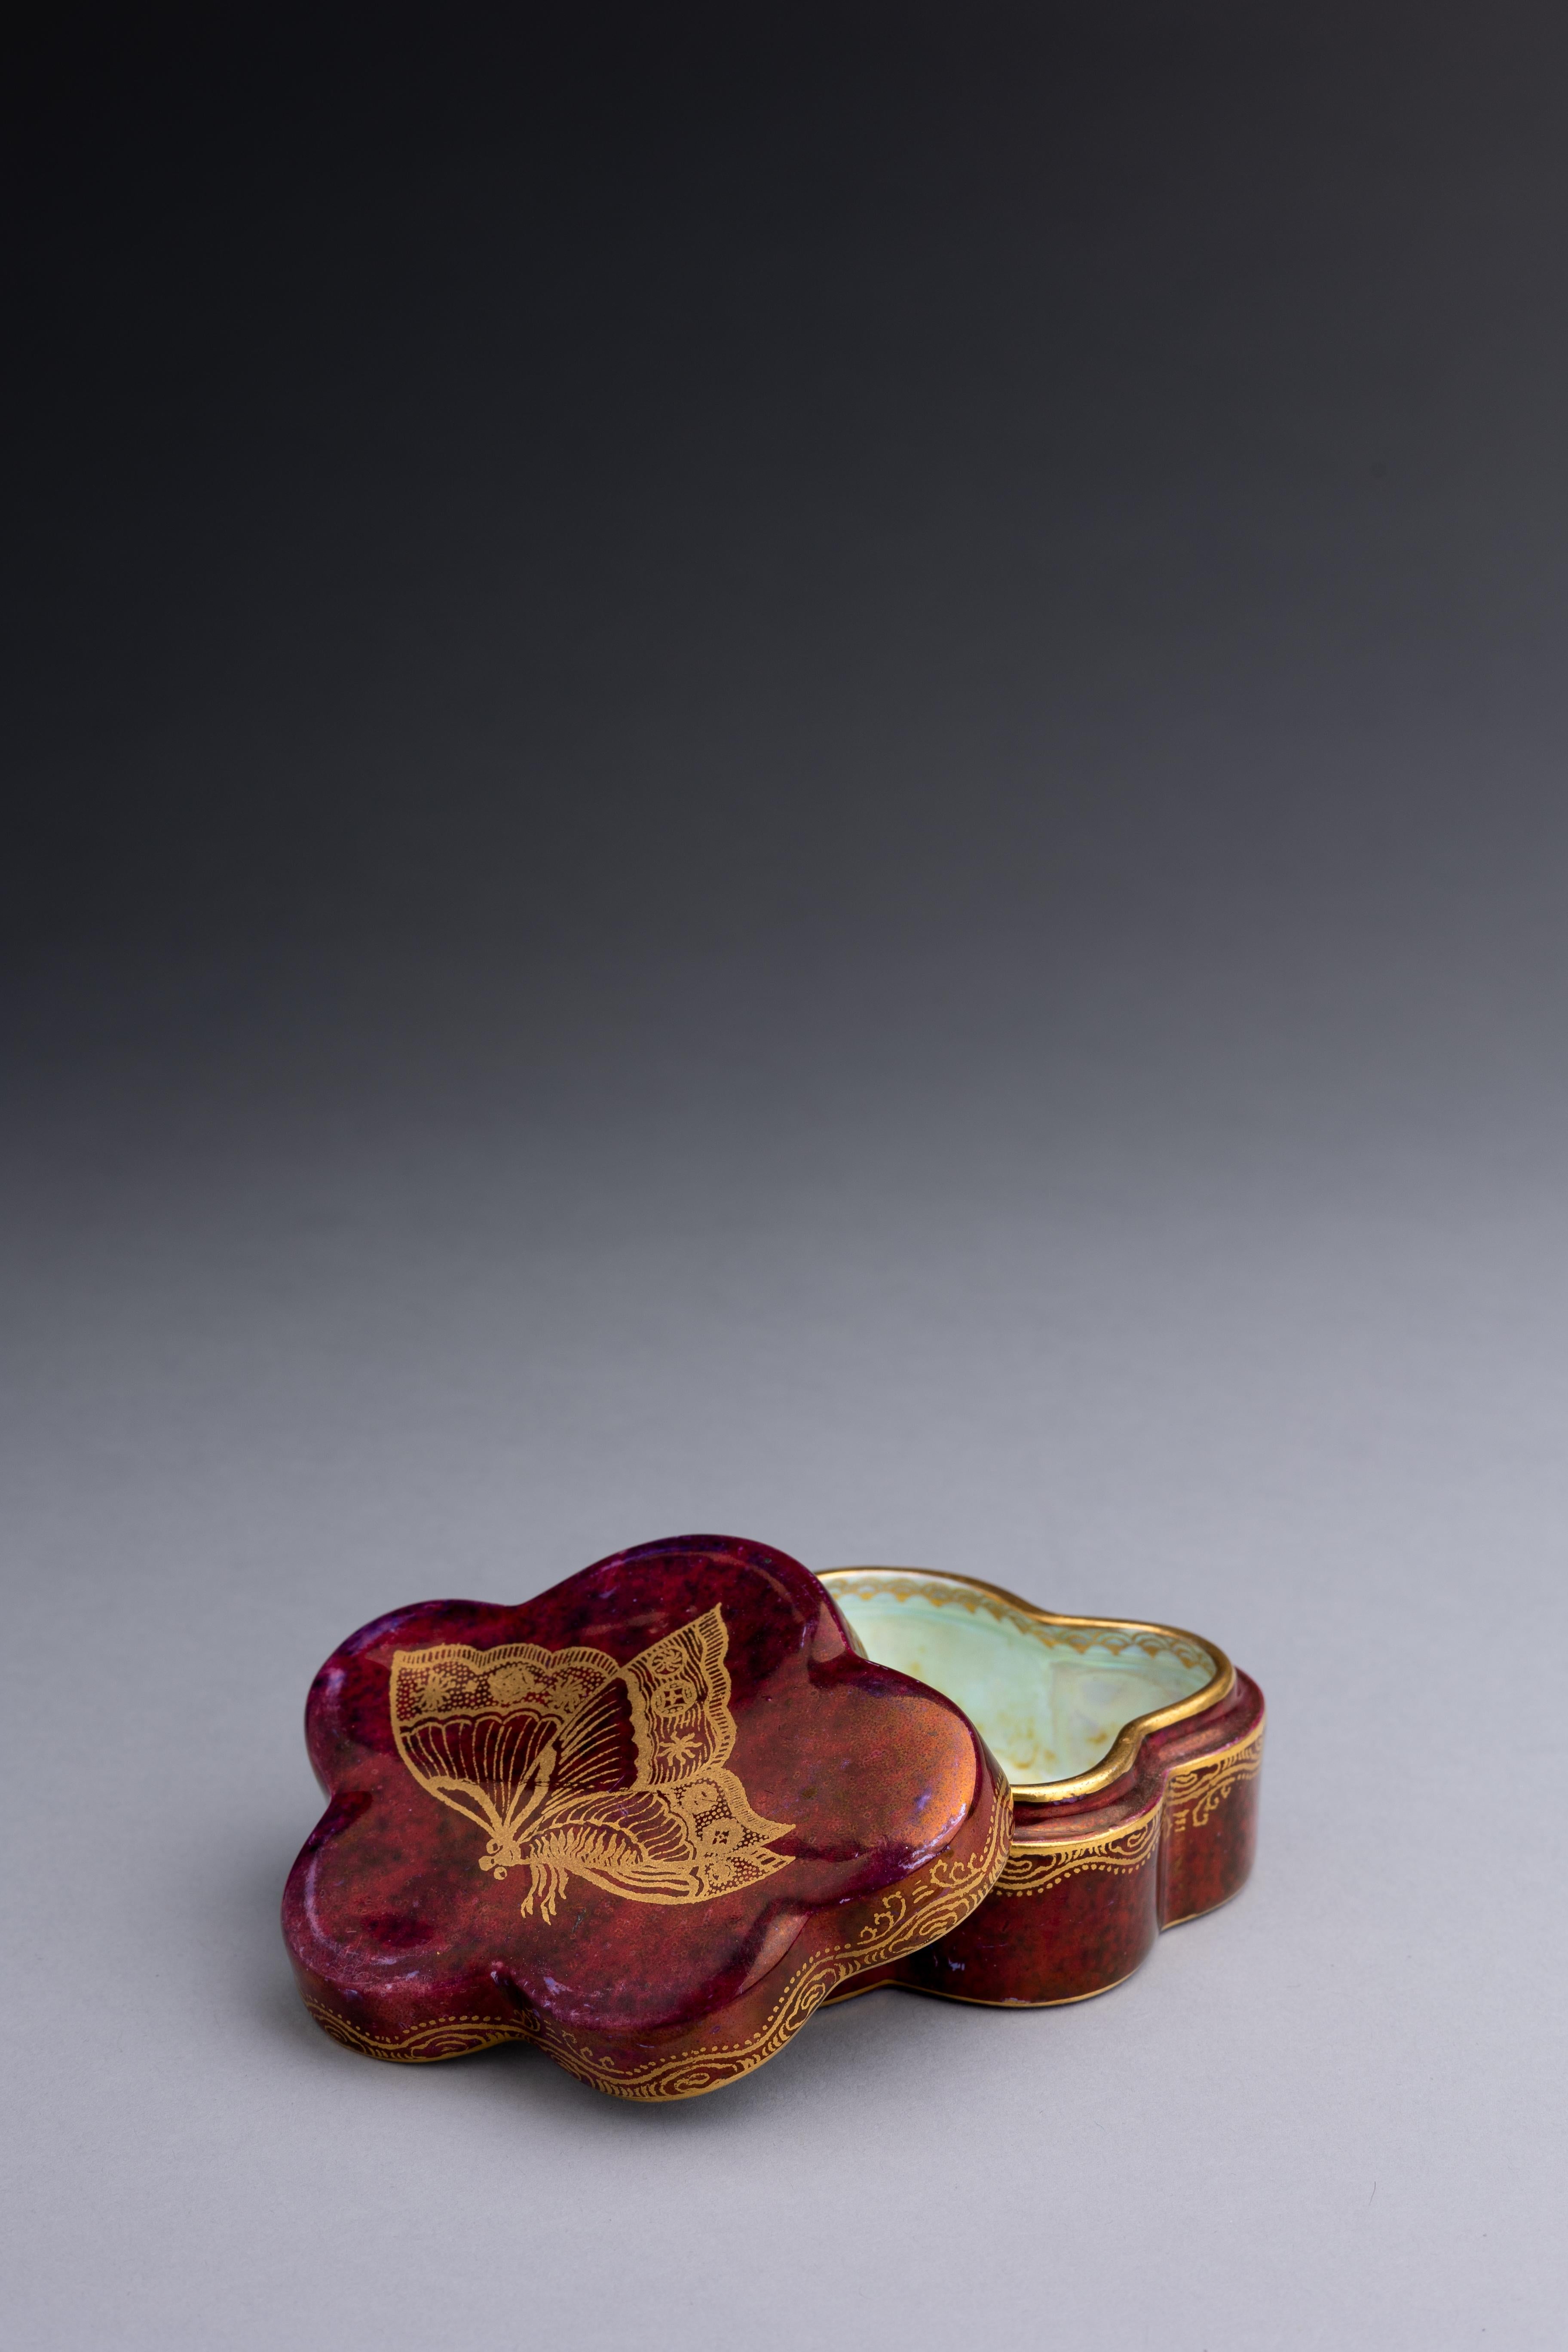 A ruby lustre box with mother-of-pearl lustre interior and decorated with polychrome butterflies in gold, designed by Daisy Makeig-Jones circa 1920.

This pattern, Z4827, was number 5 of the revolutionary First Ten Lustres range introduced by